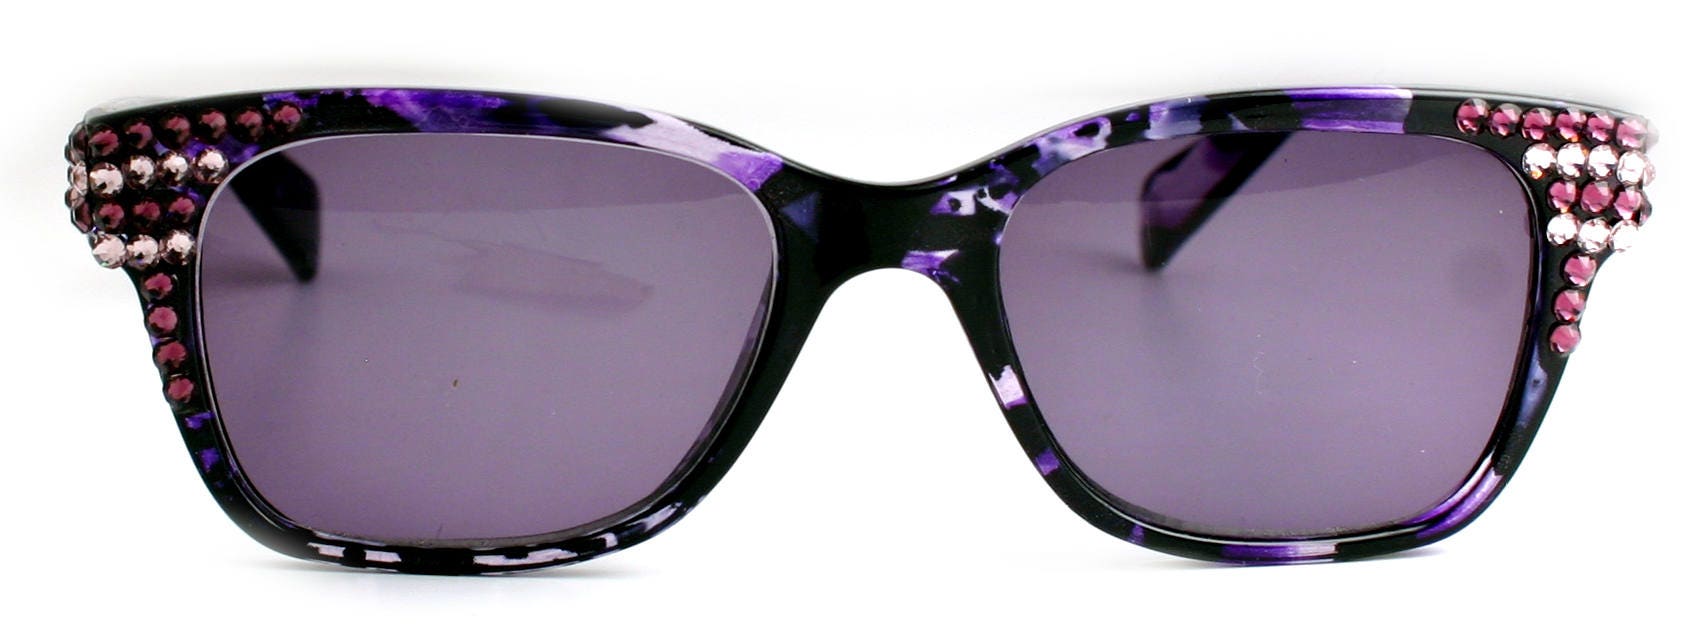 Oasis, (Bling) Sun Readers W (Amethyst, L. Amethyst) Genuine European Crystals (Fully Magnified) (Purple) Tortoiseshell NY Fifth Avenue